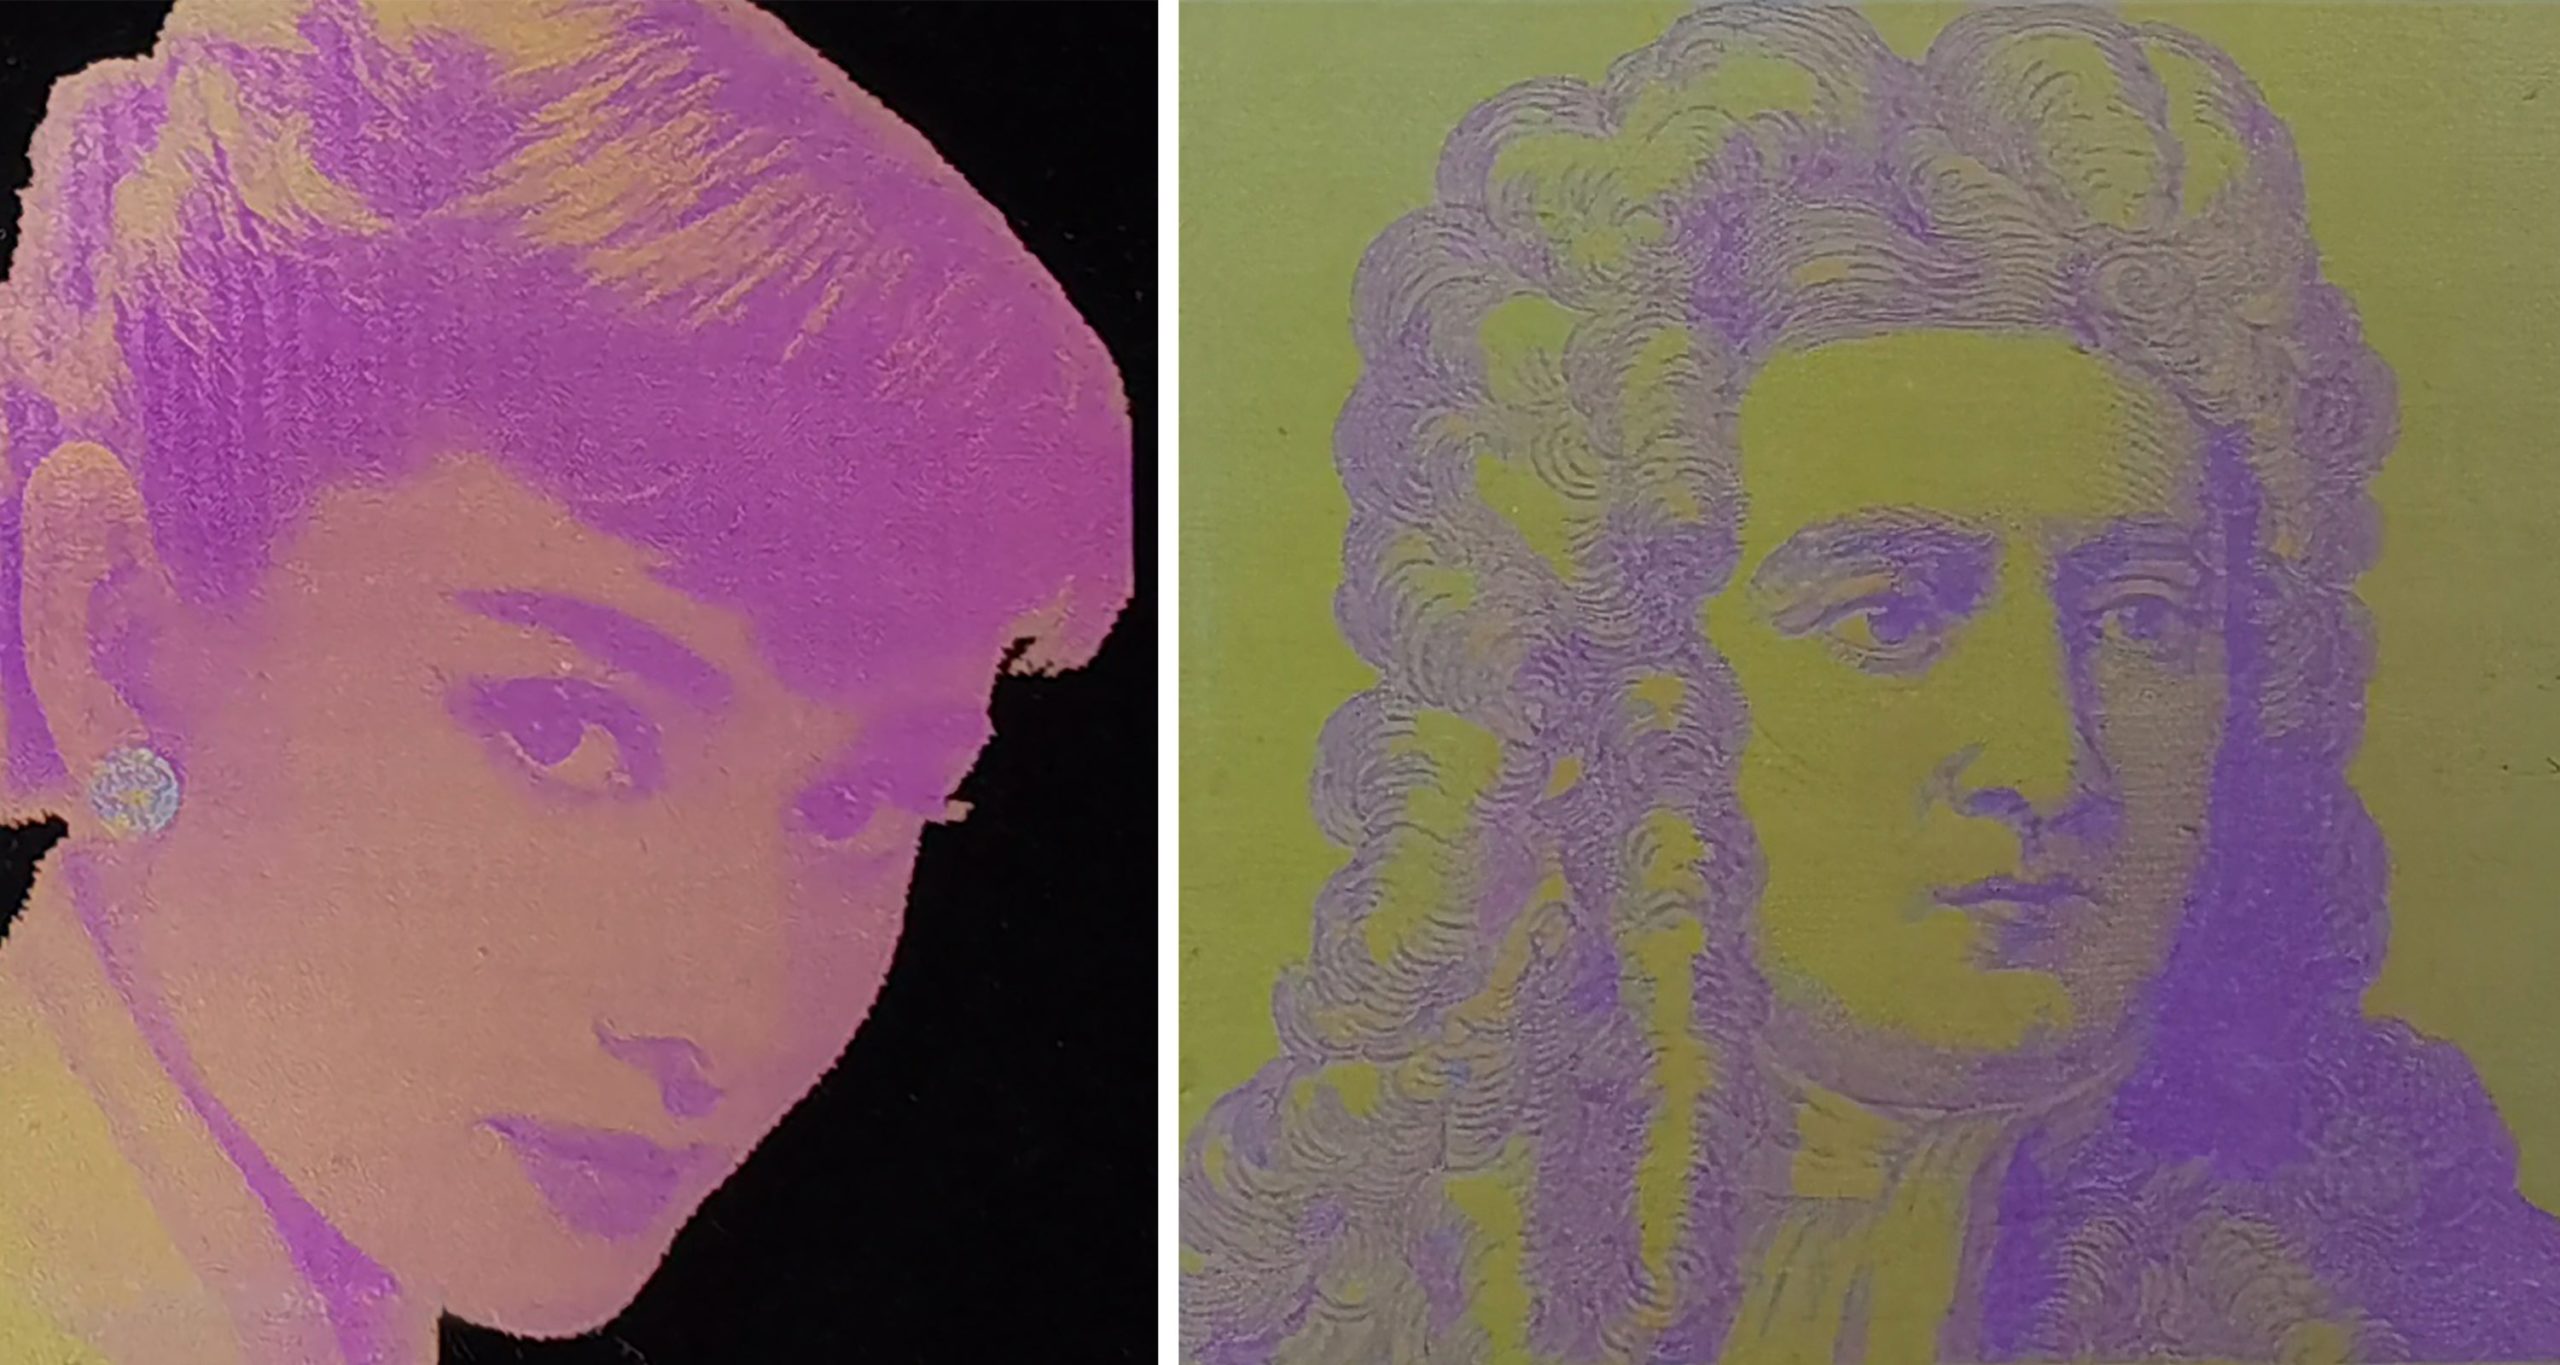 Images of Audrey Hepburn and Isaac Newton demonstrate the high fidelity of this new approach to printing. (Image: Yanlin Song)